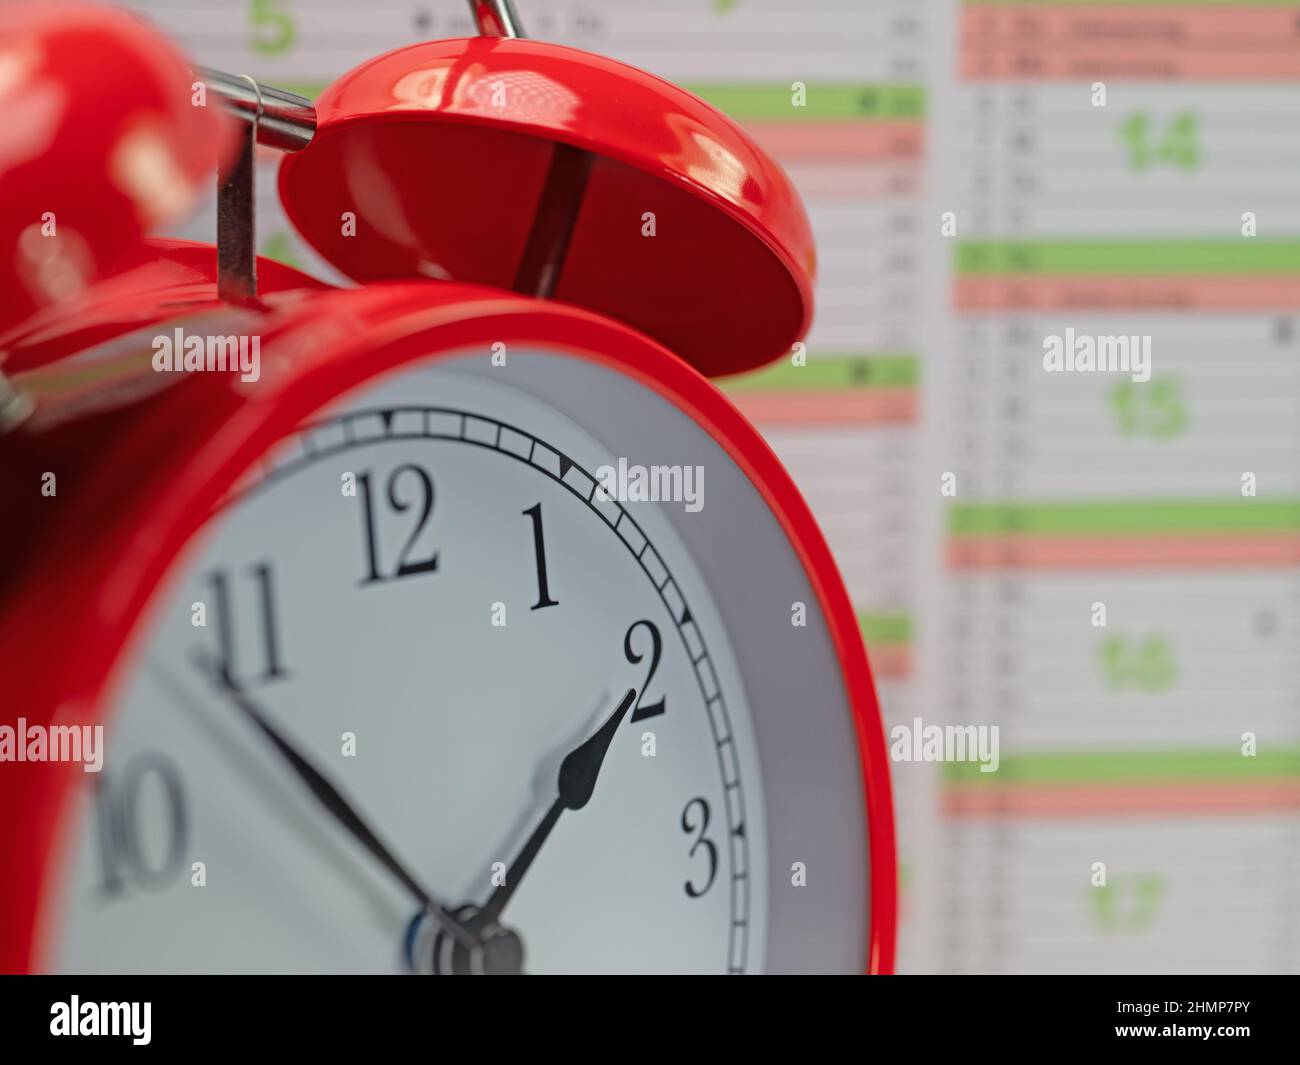 Red alarm clock in front of a calendar Stock Photo